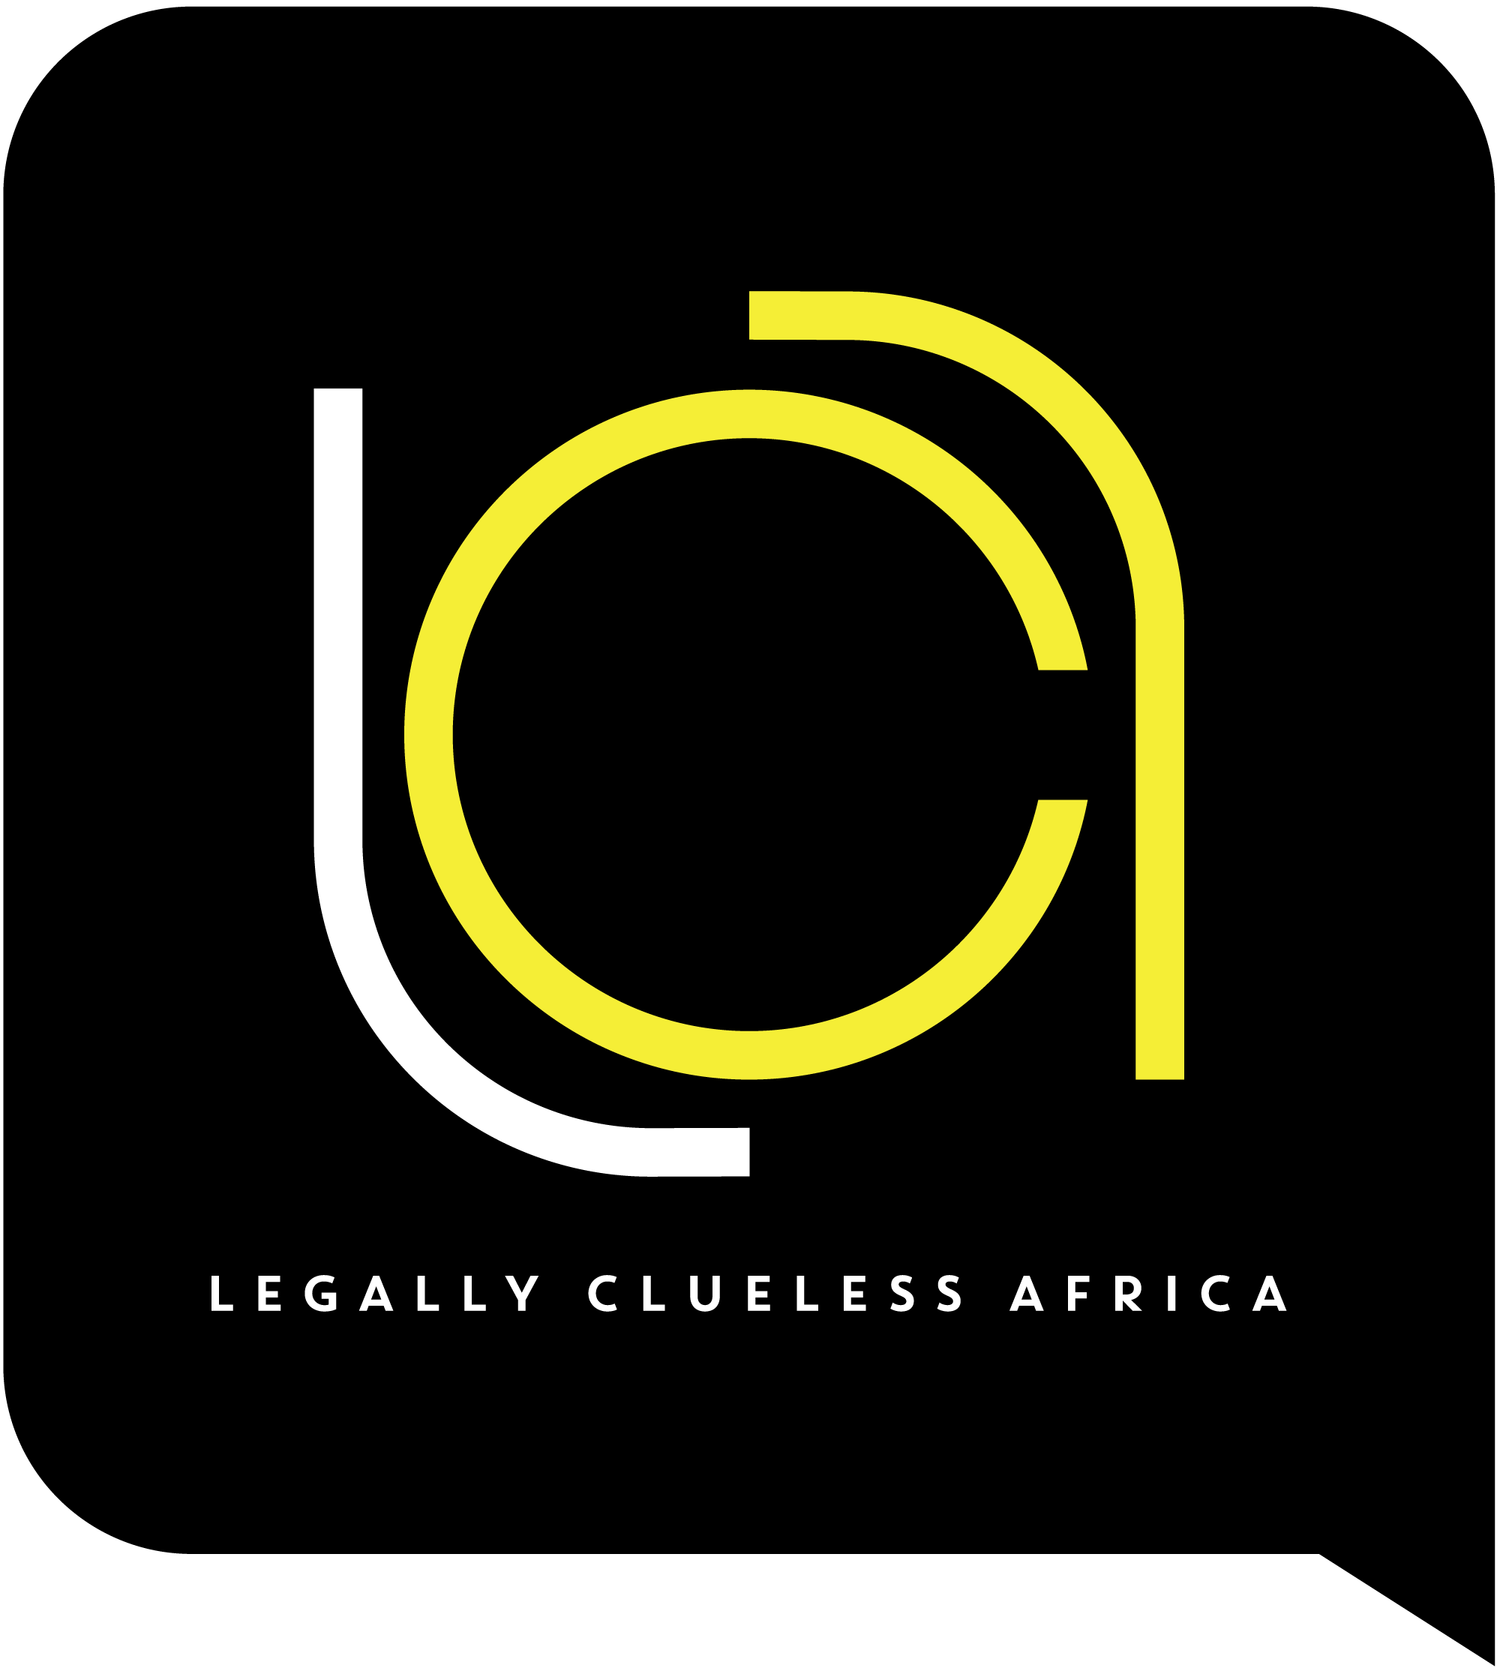 Legally Clueless Africa